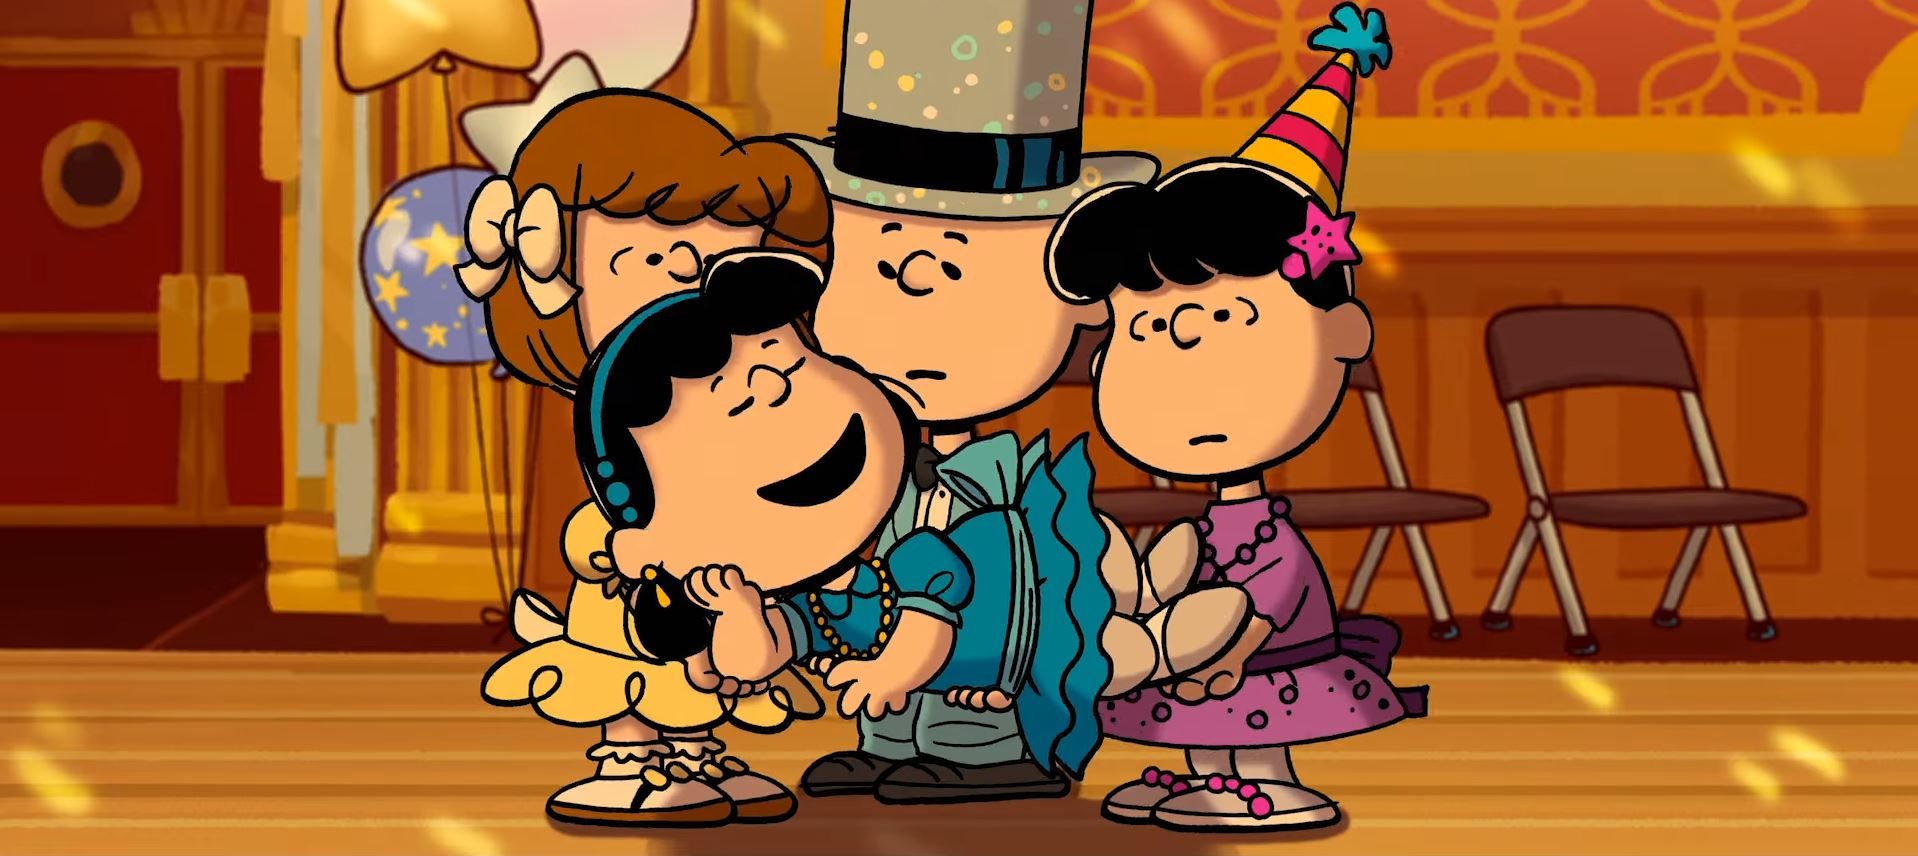 peanuts-for-auld-land-syne-special